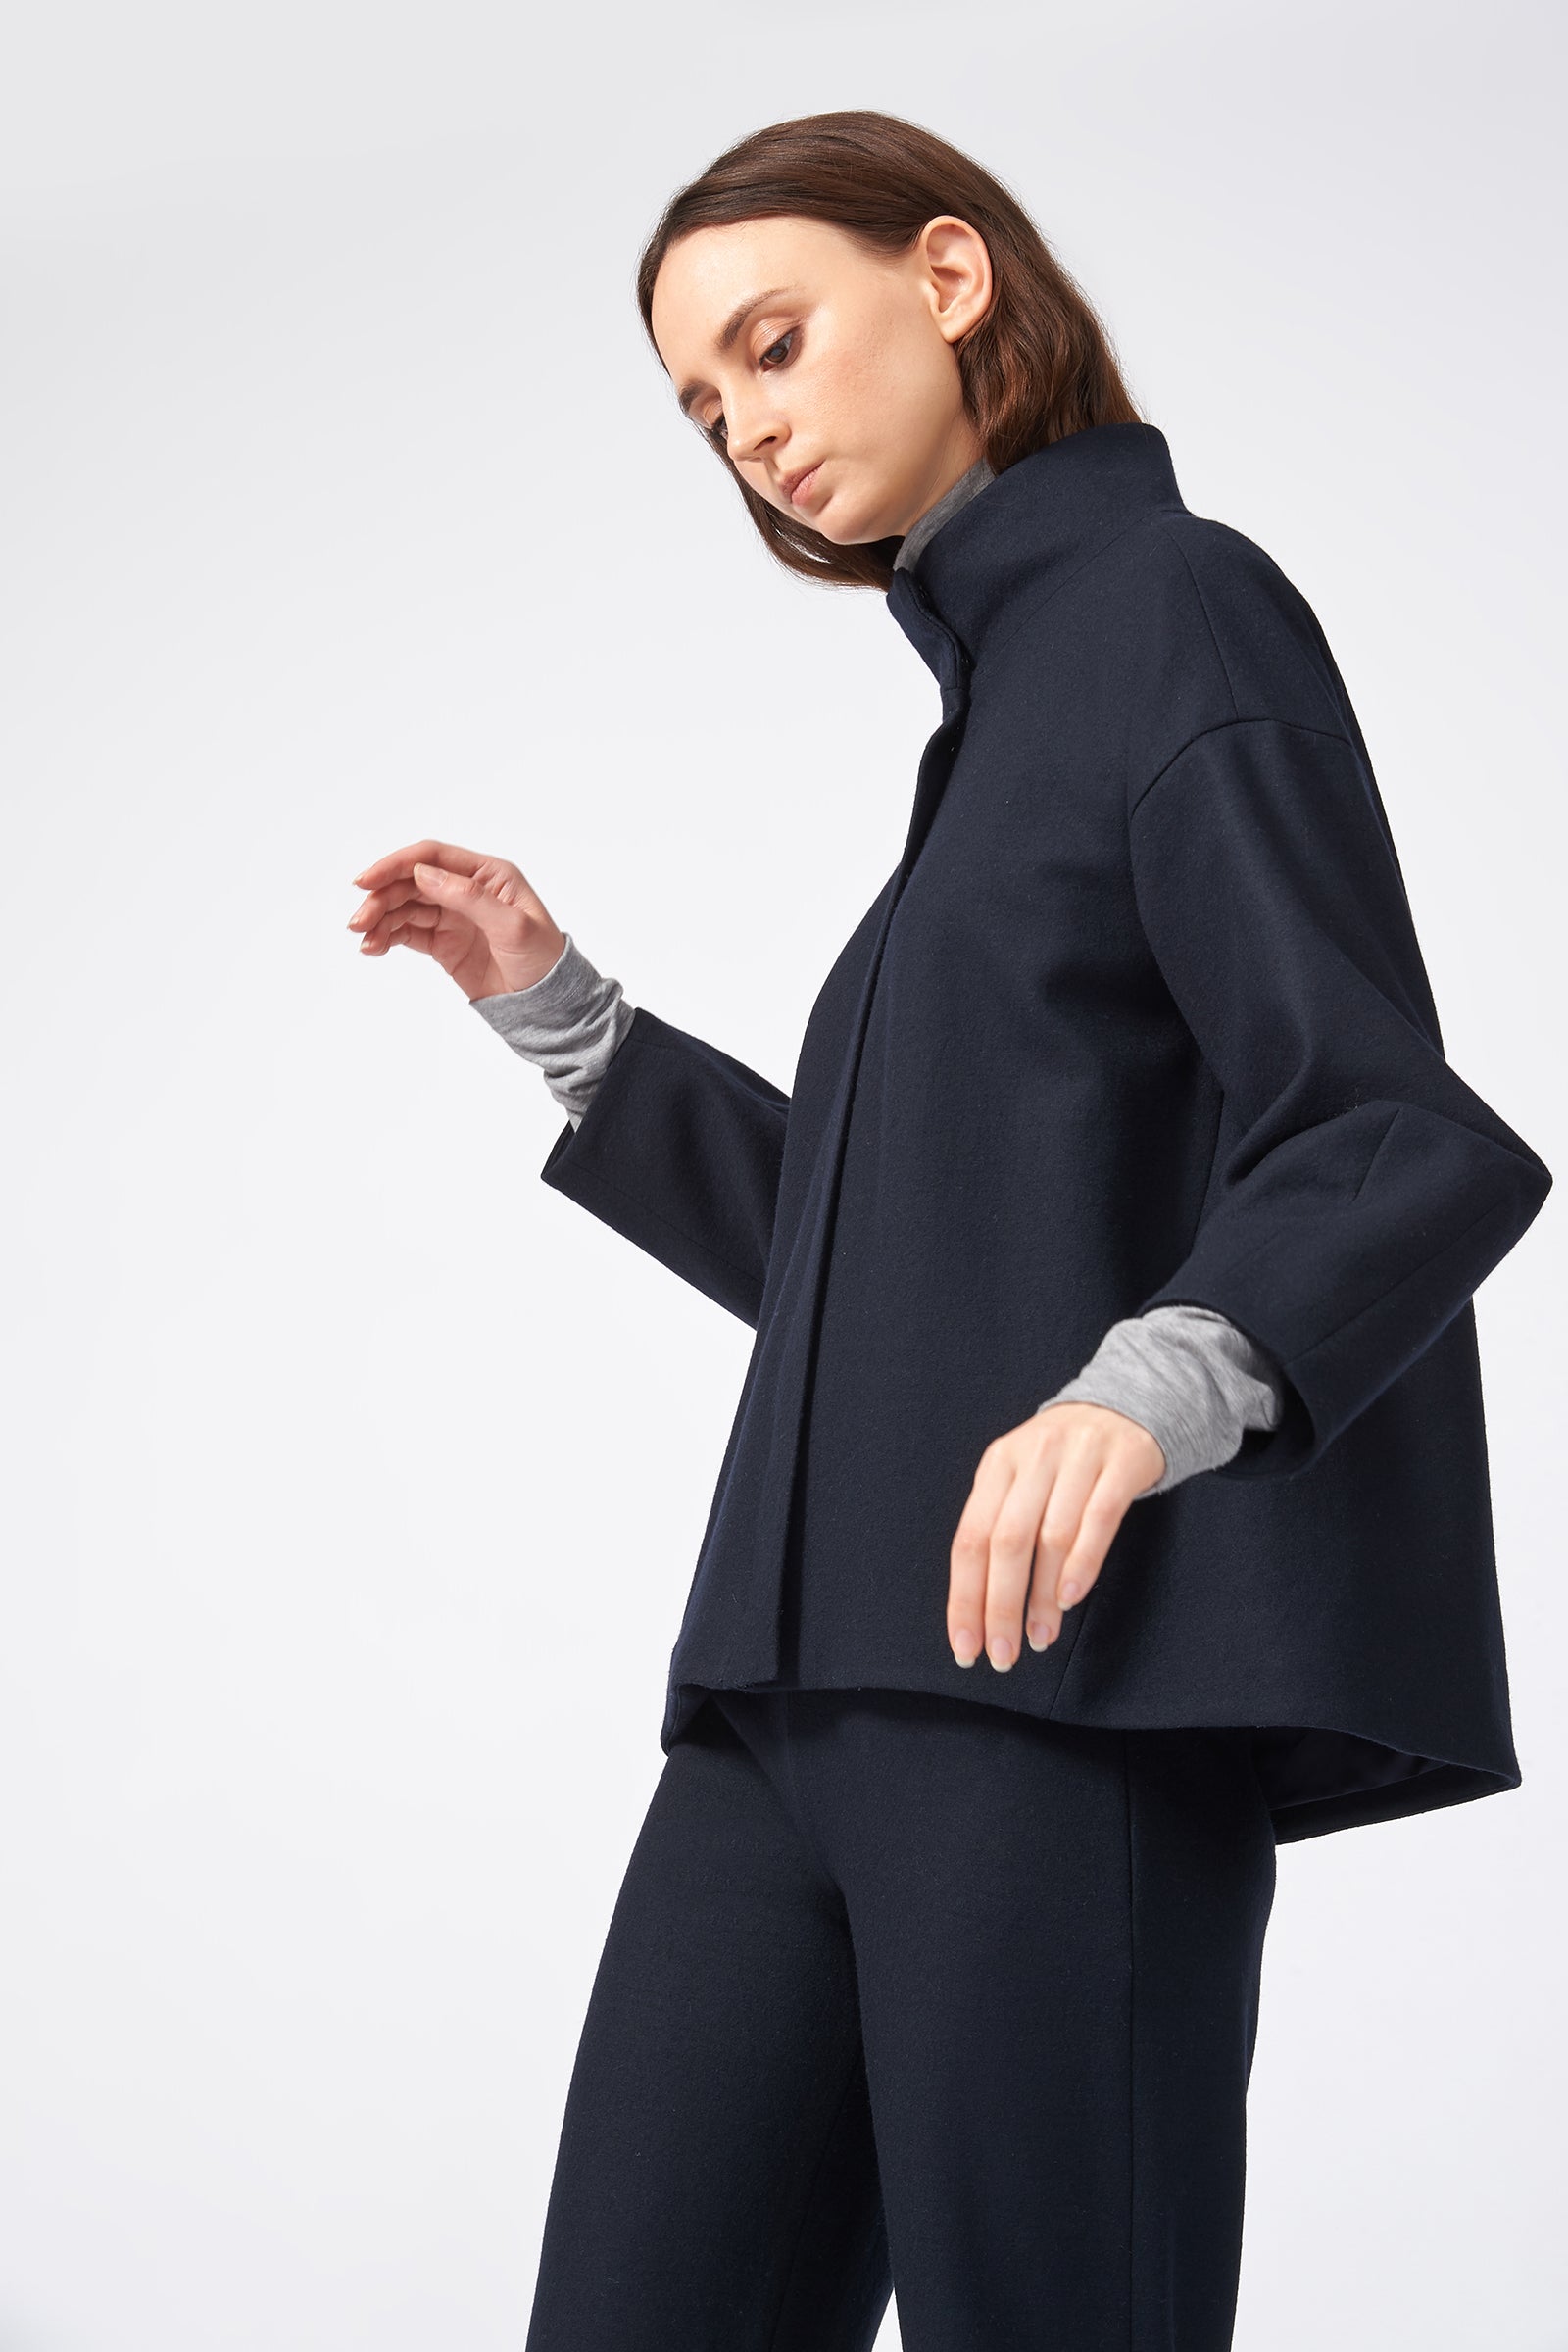 Kal Rieman Angle Cuff Jacket in Midnight on Model Side View